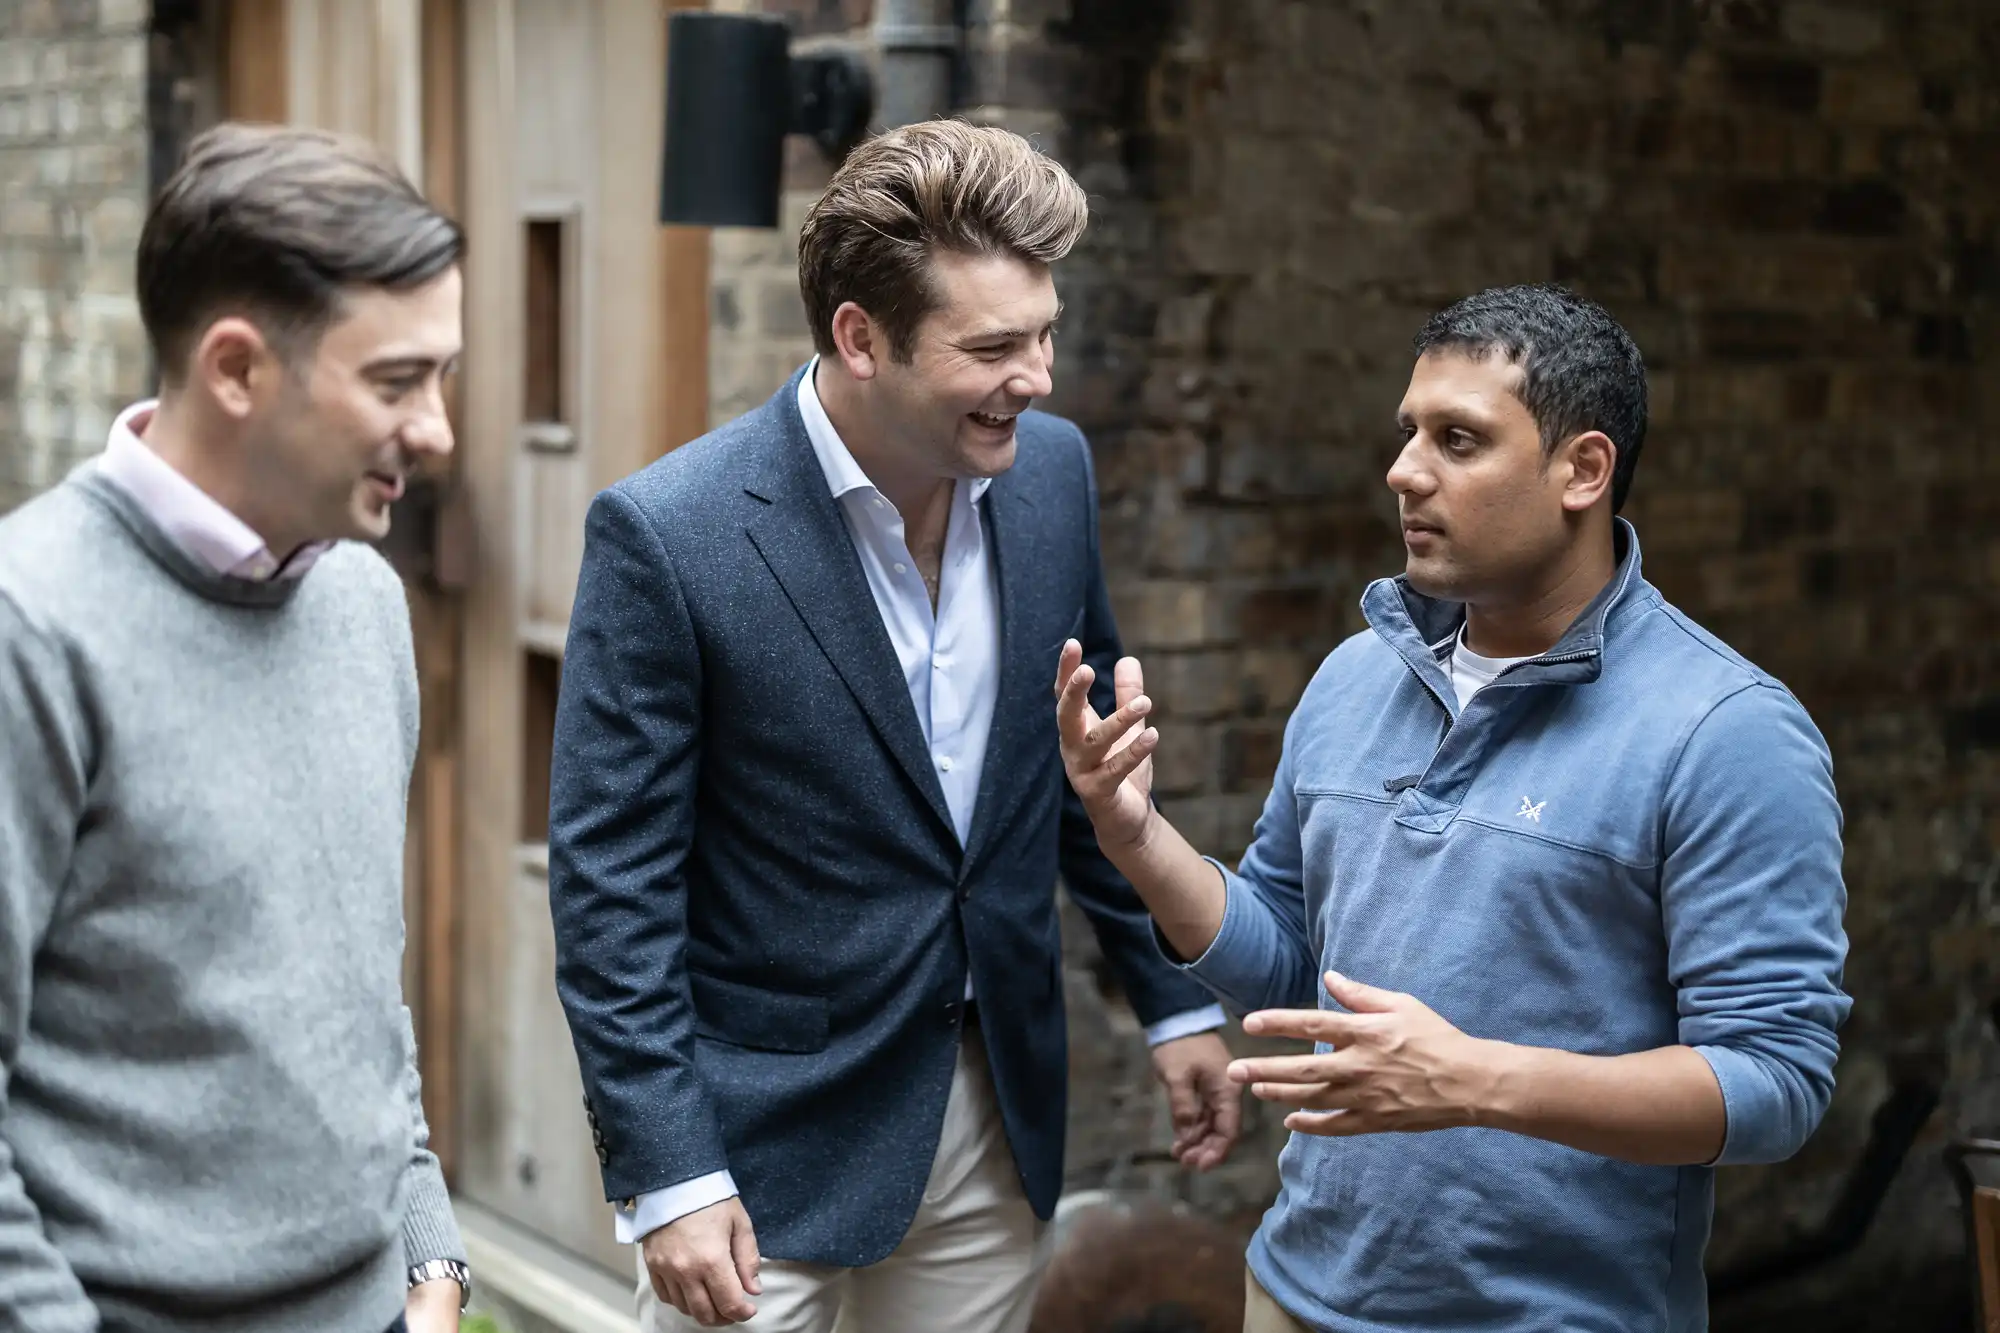 Three men engaged in a casual conversation outdoors, expressing positive emotions and gestures. two are listening intently while one speaks animatedly.